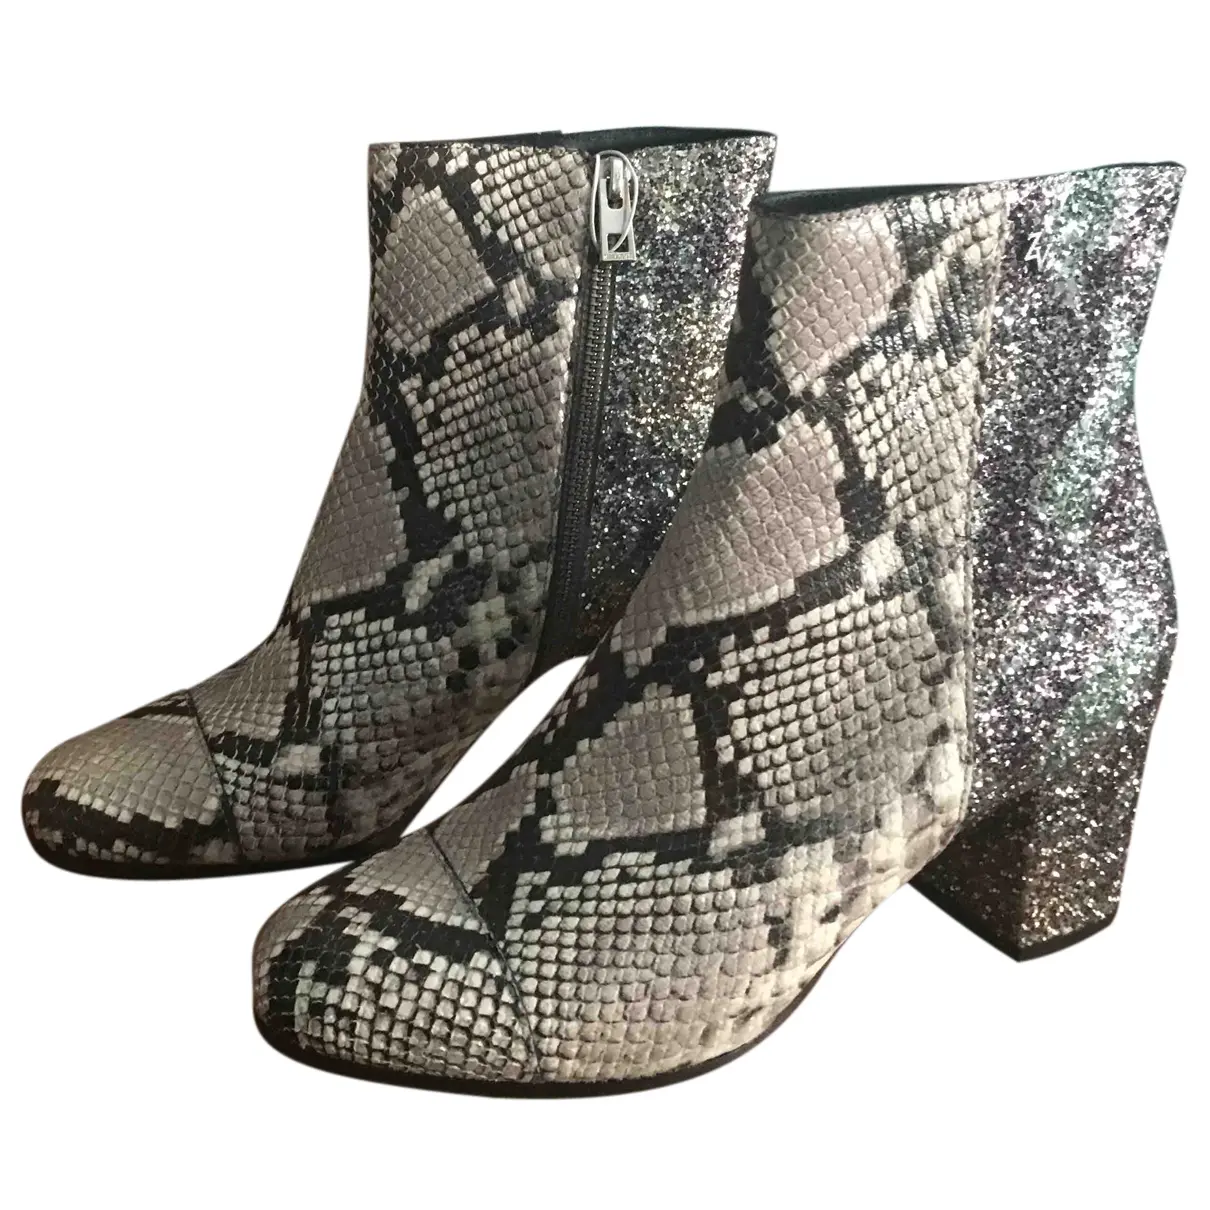 Lena Wild leather ankle boots Zadig & Voltaire